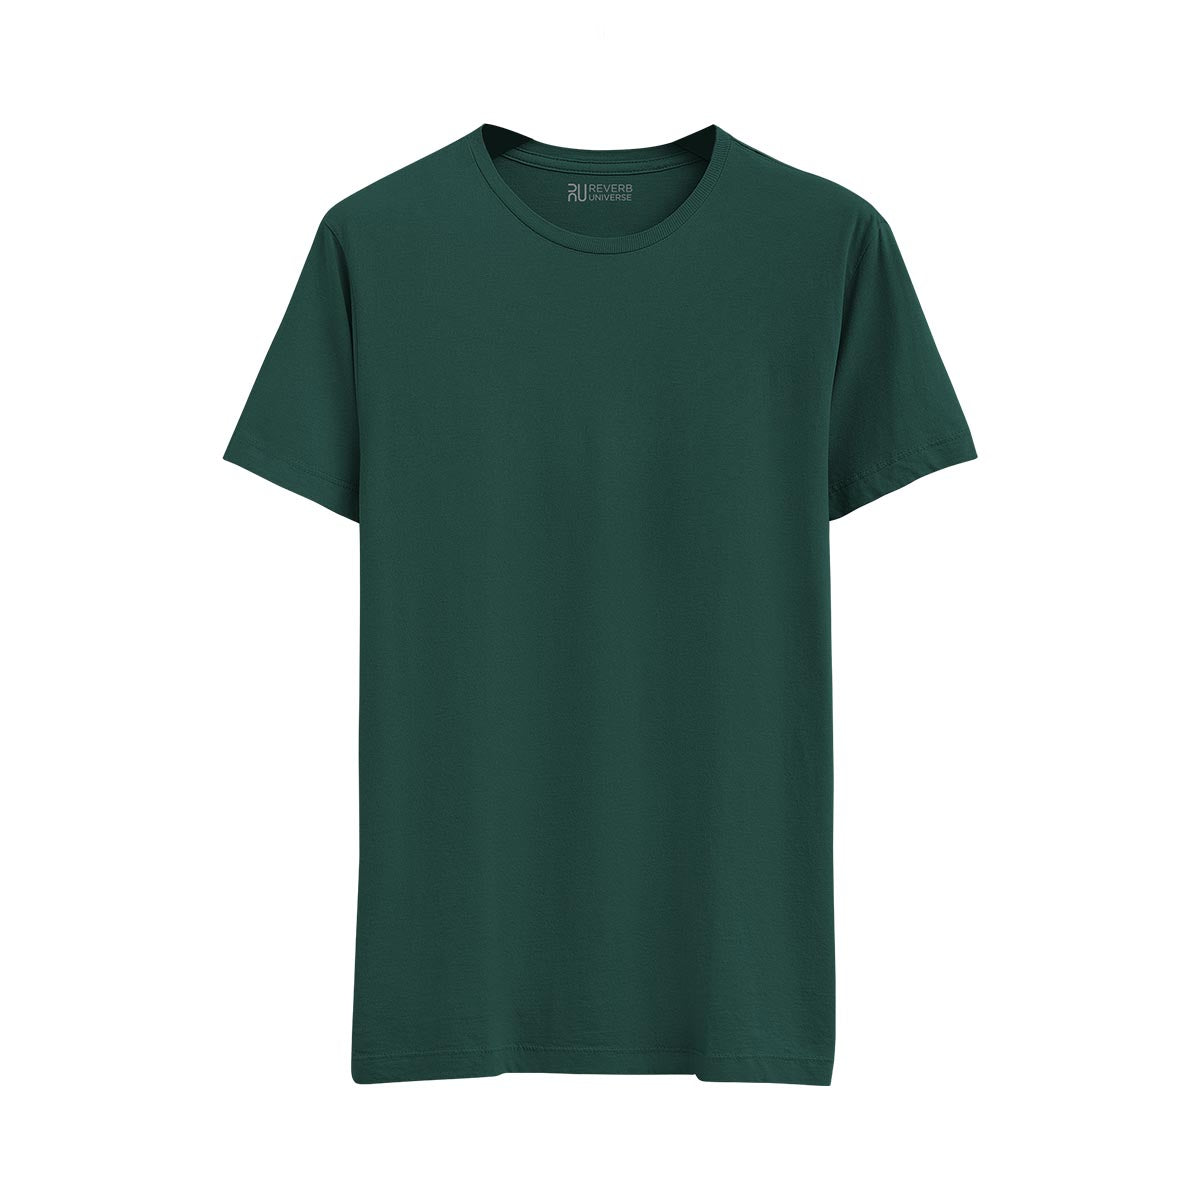 Women's Basic Army Green Short Sleeve Relaxed Tee